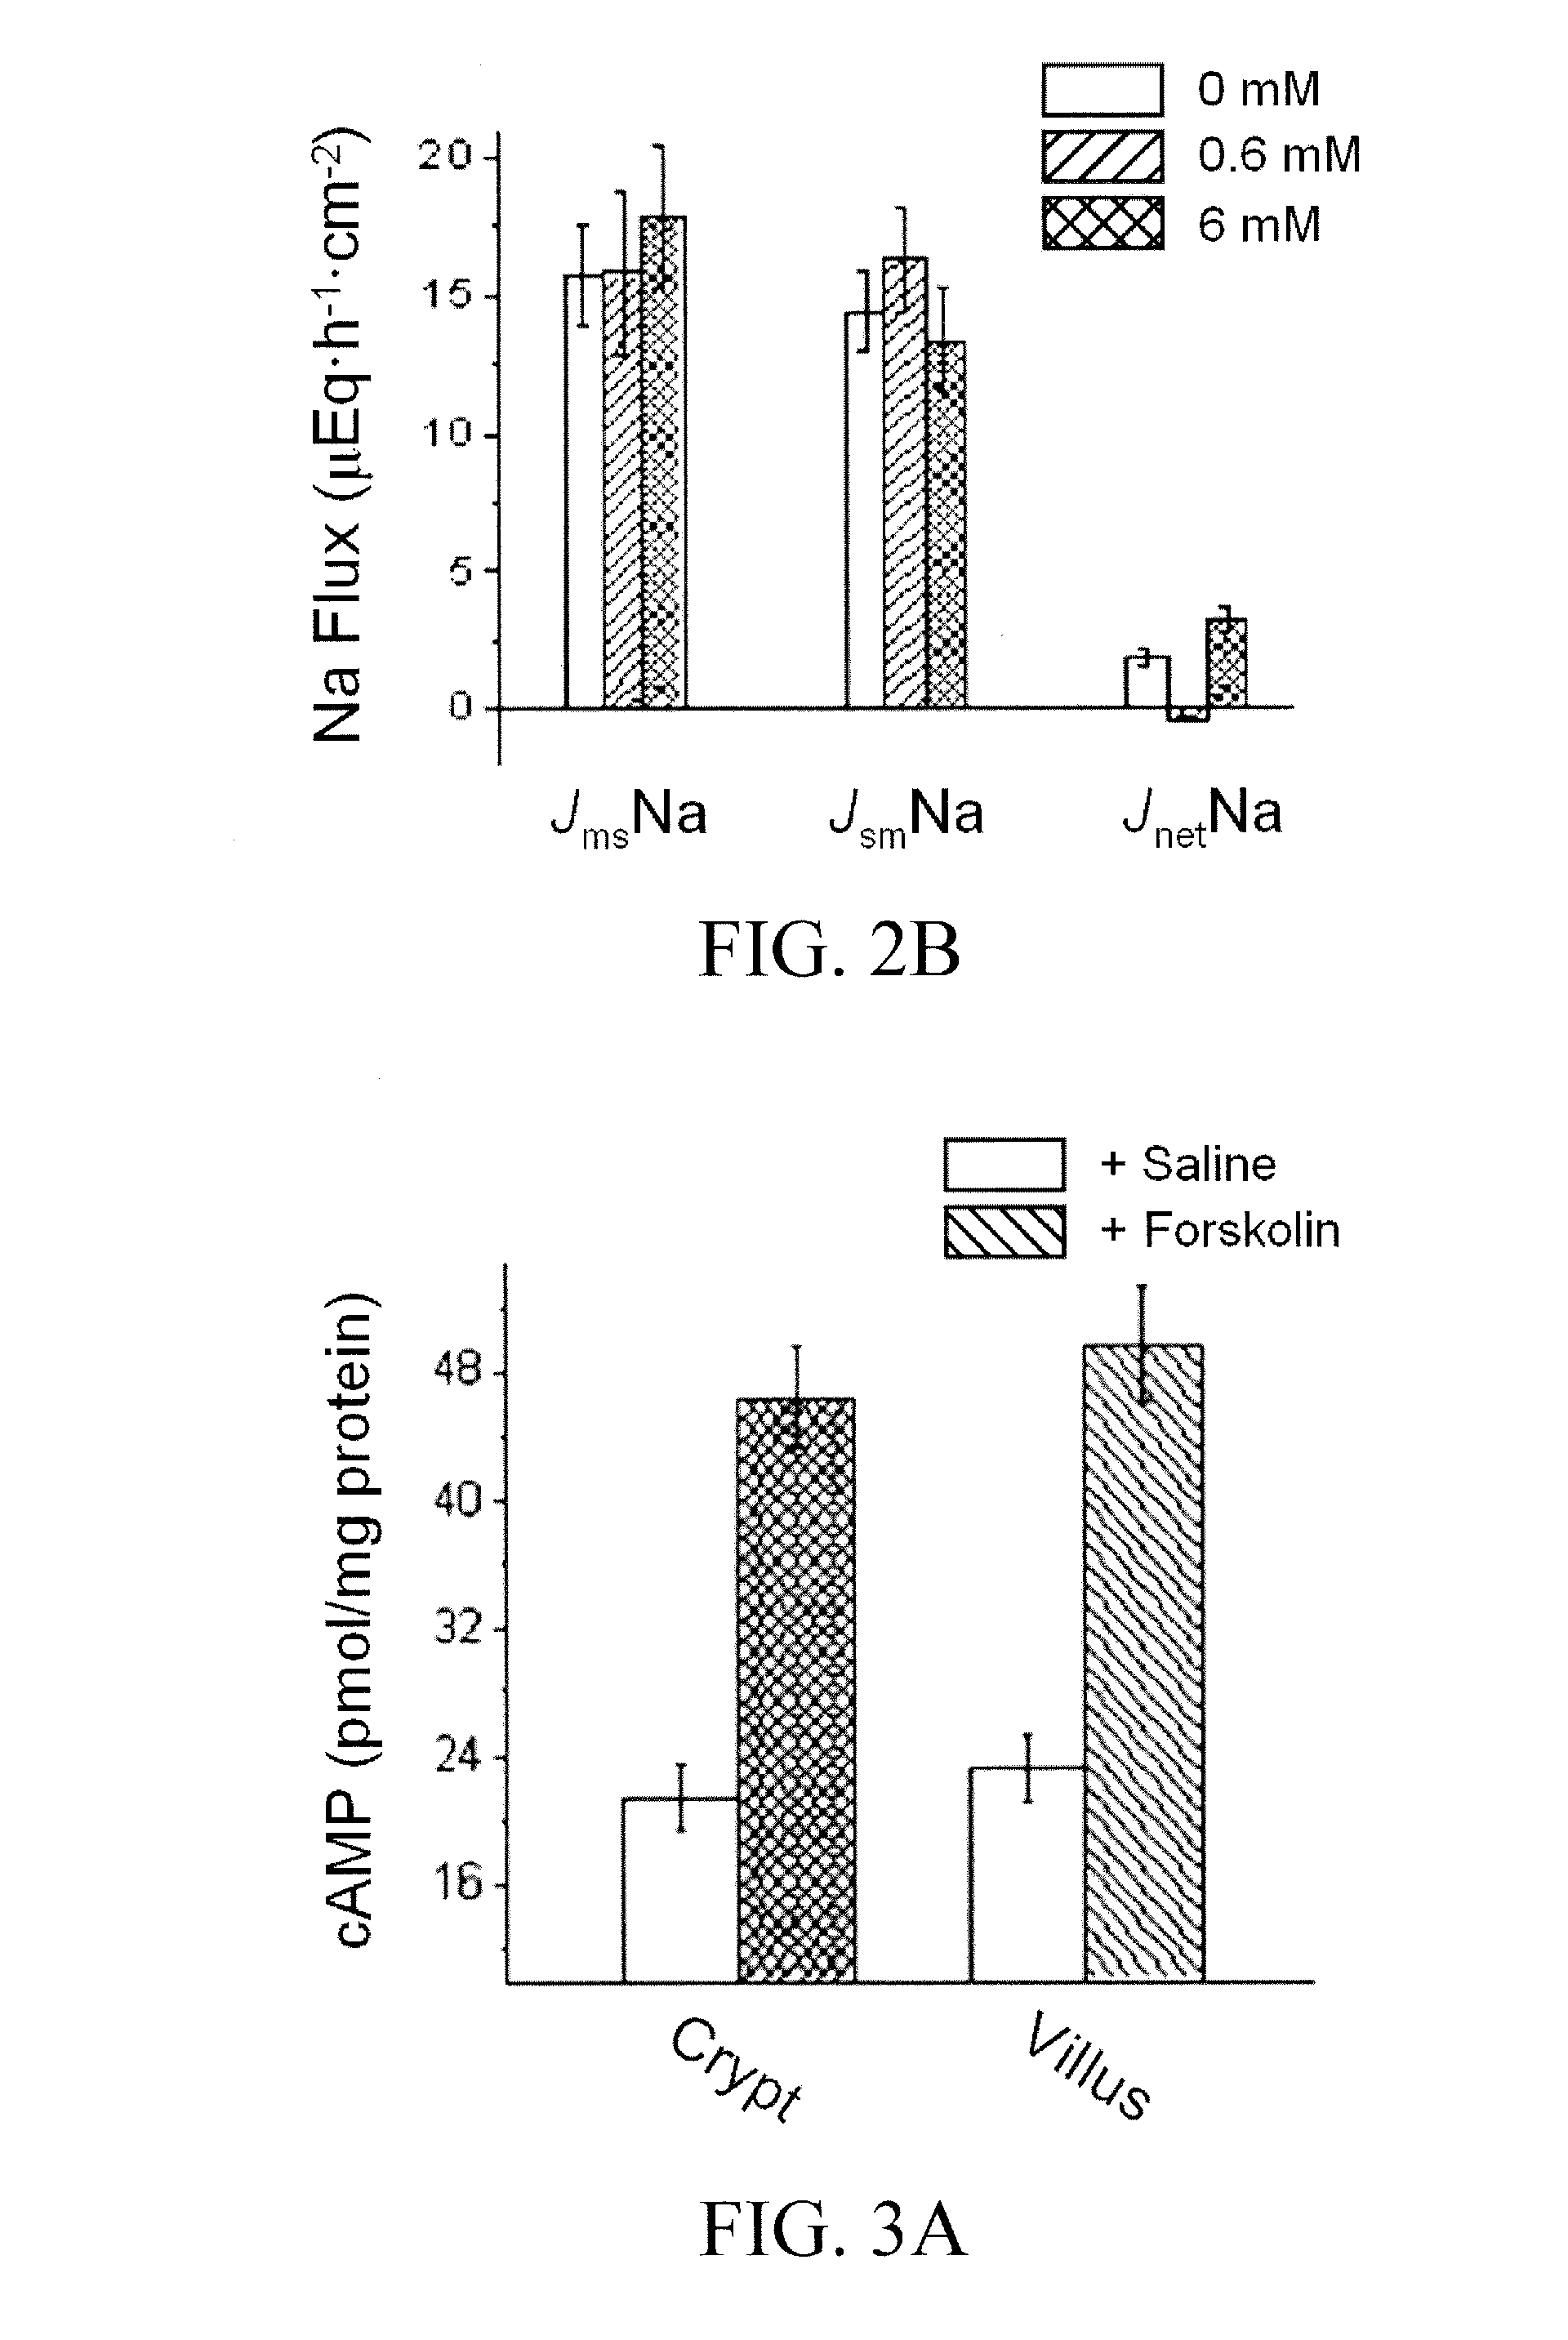 Materials and methods for treating diarrhea